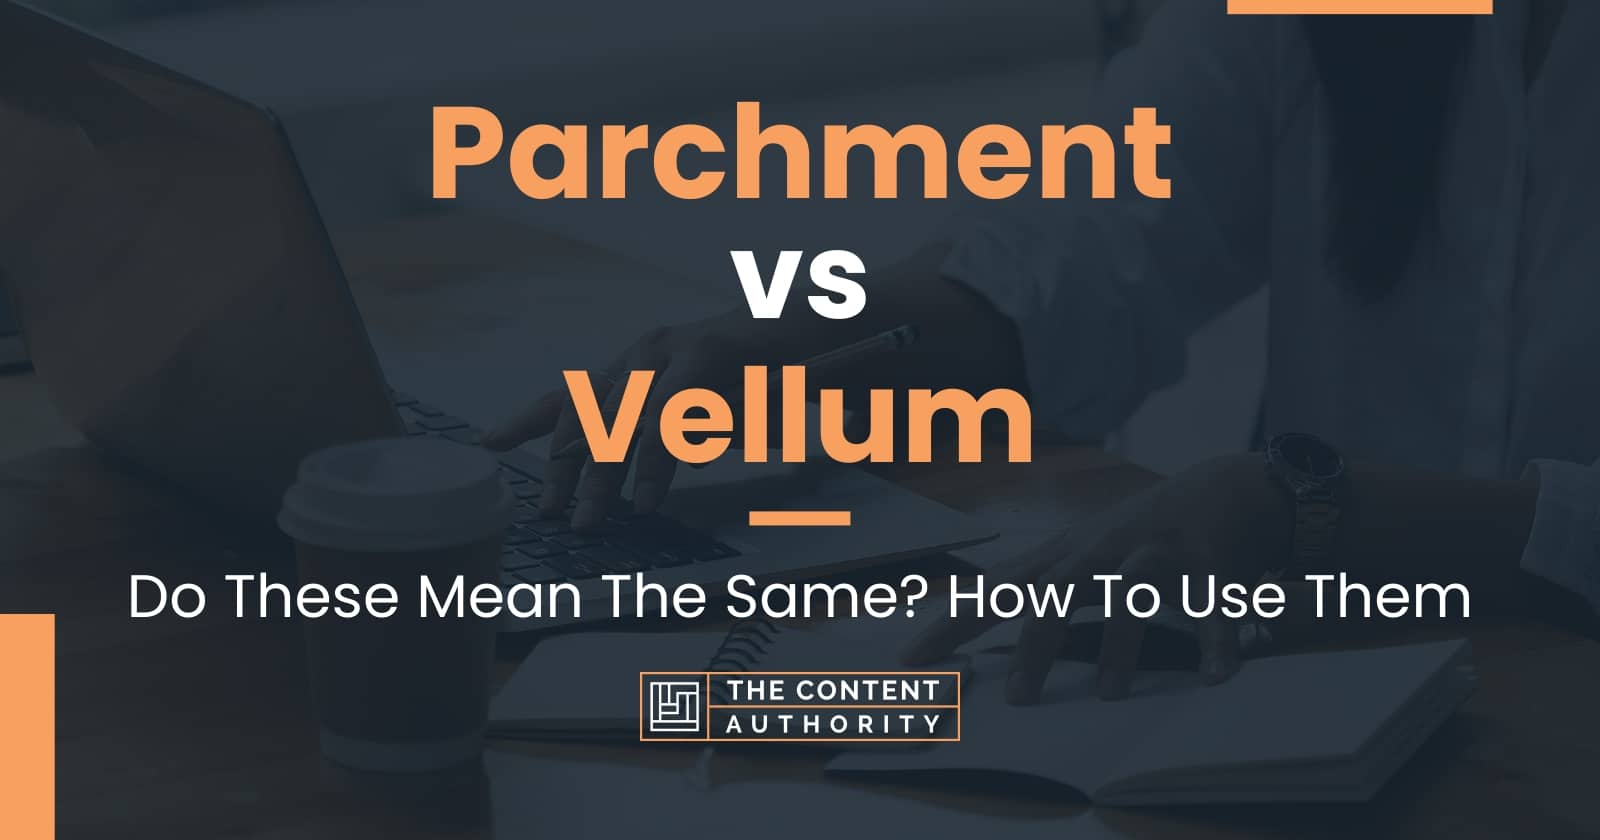 Parchment vs Vellum: Do These Mean The Same? How To Use Them